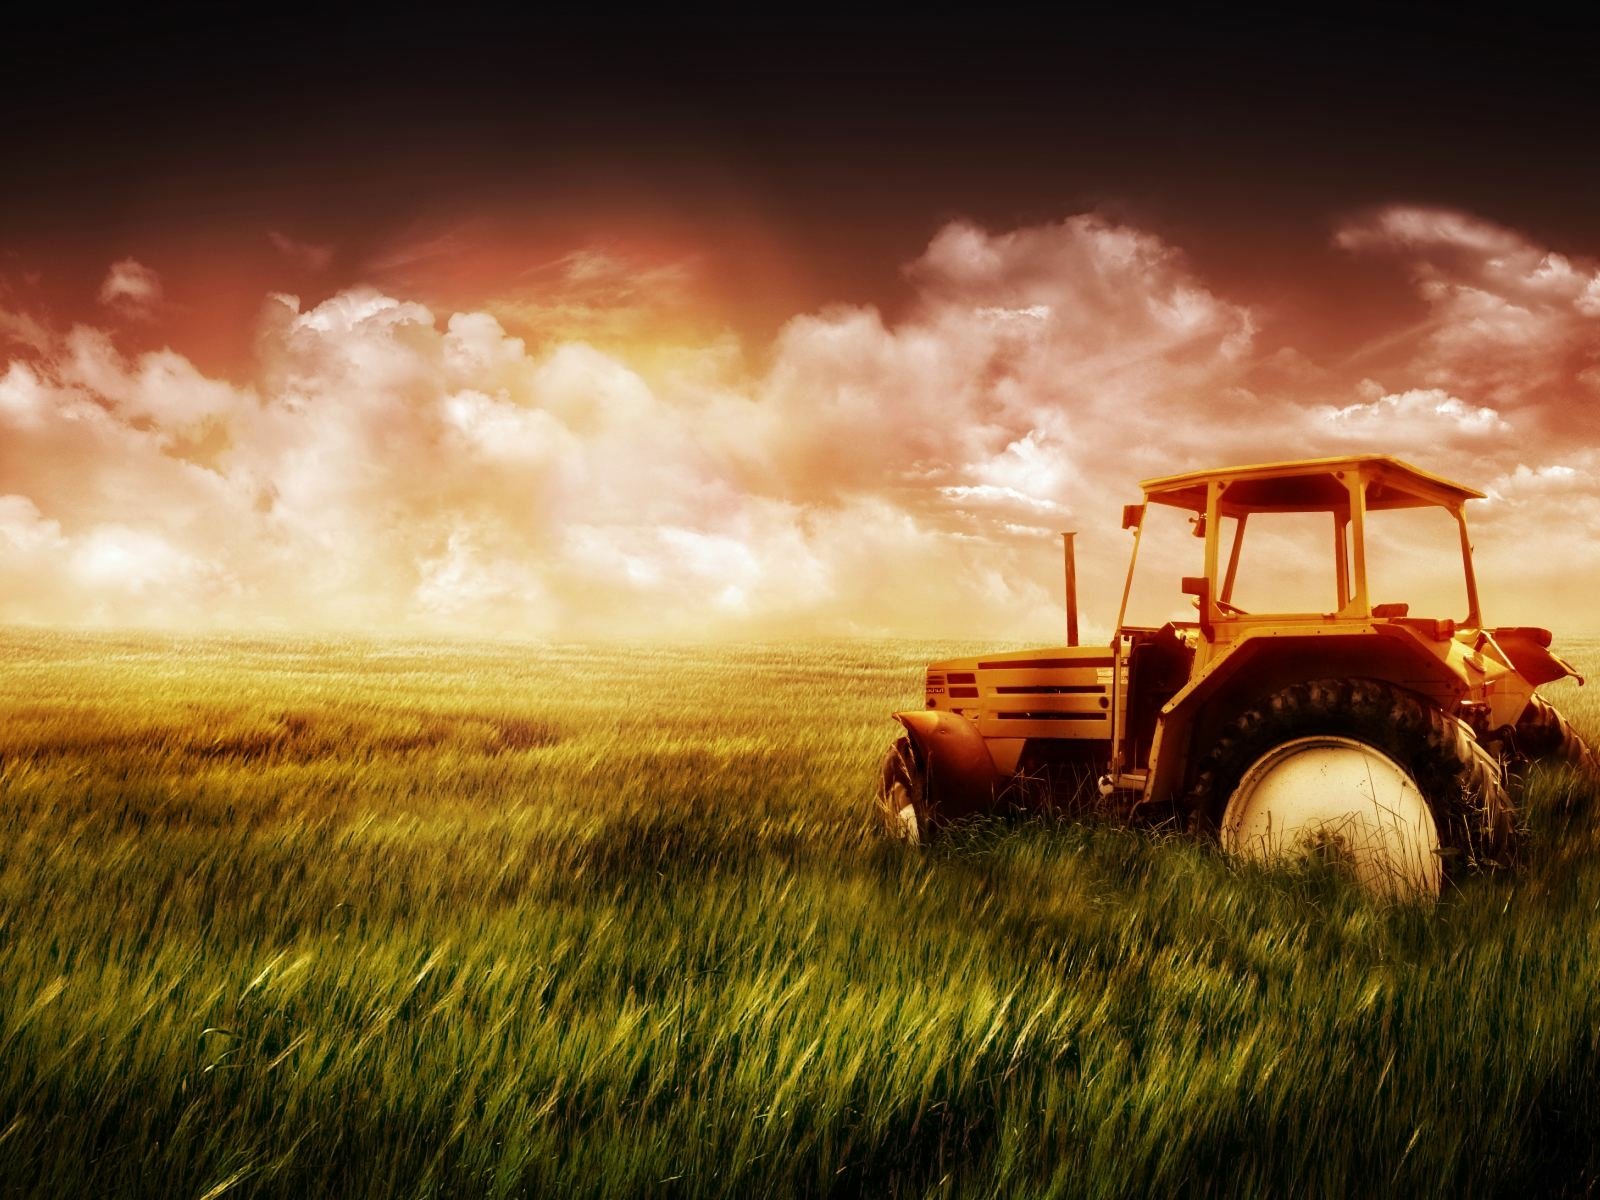 Tractor Wallpaper And Background Image 1600x1200 Id 440305 HD Wallpapers Download Free Map Images Wallpaper [wallpaper684.blogspot.com]